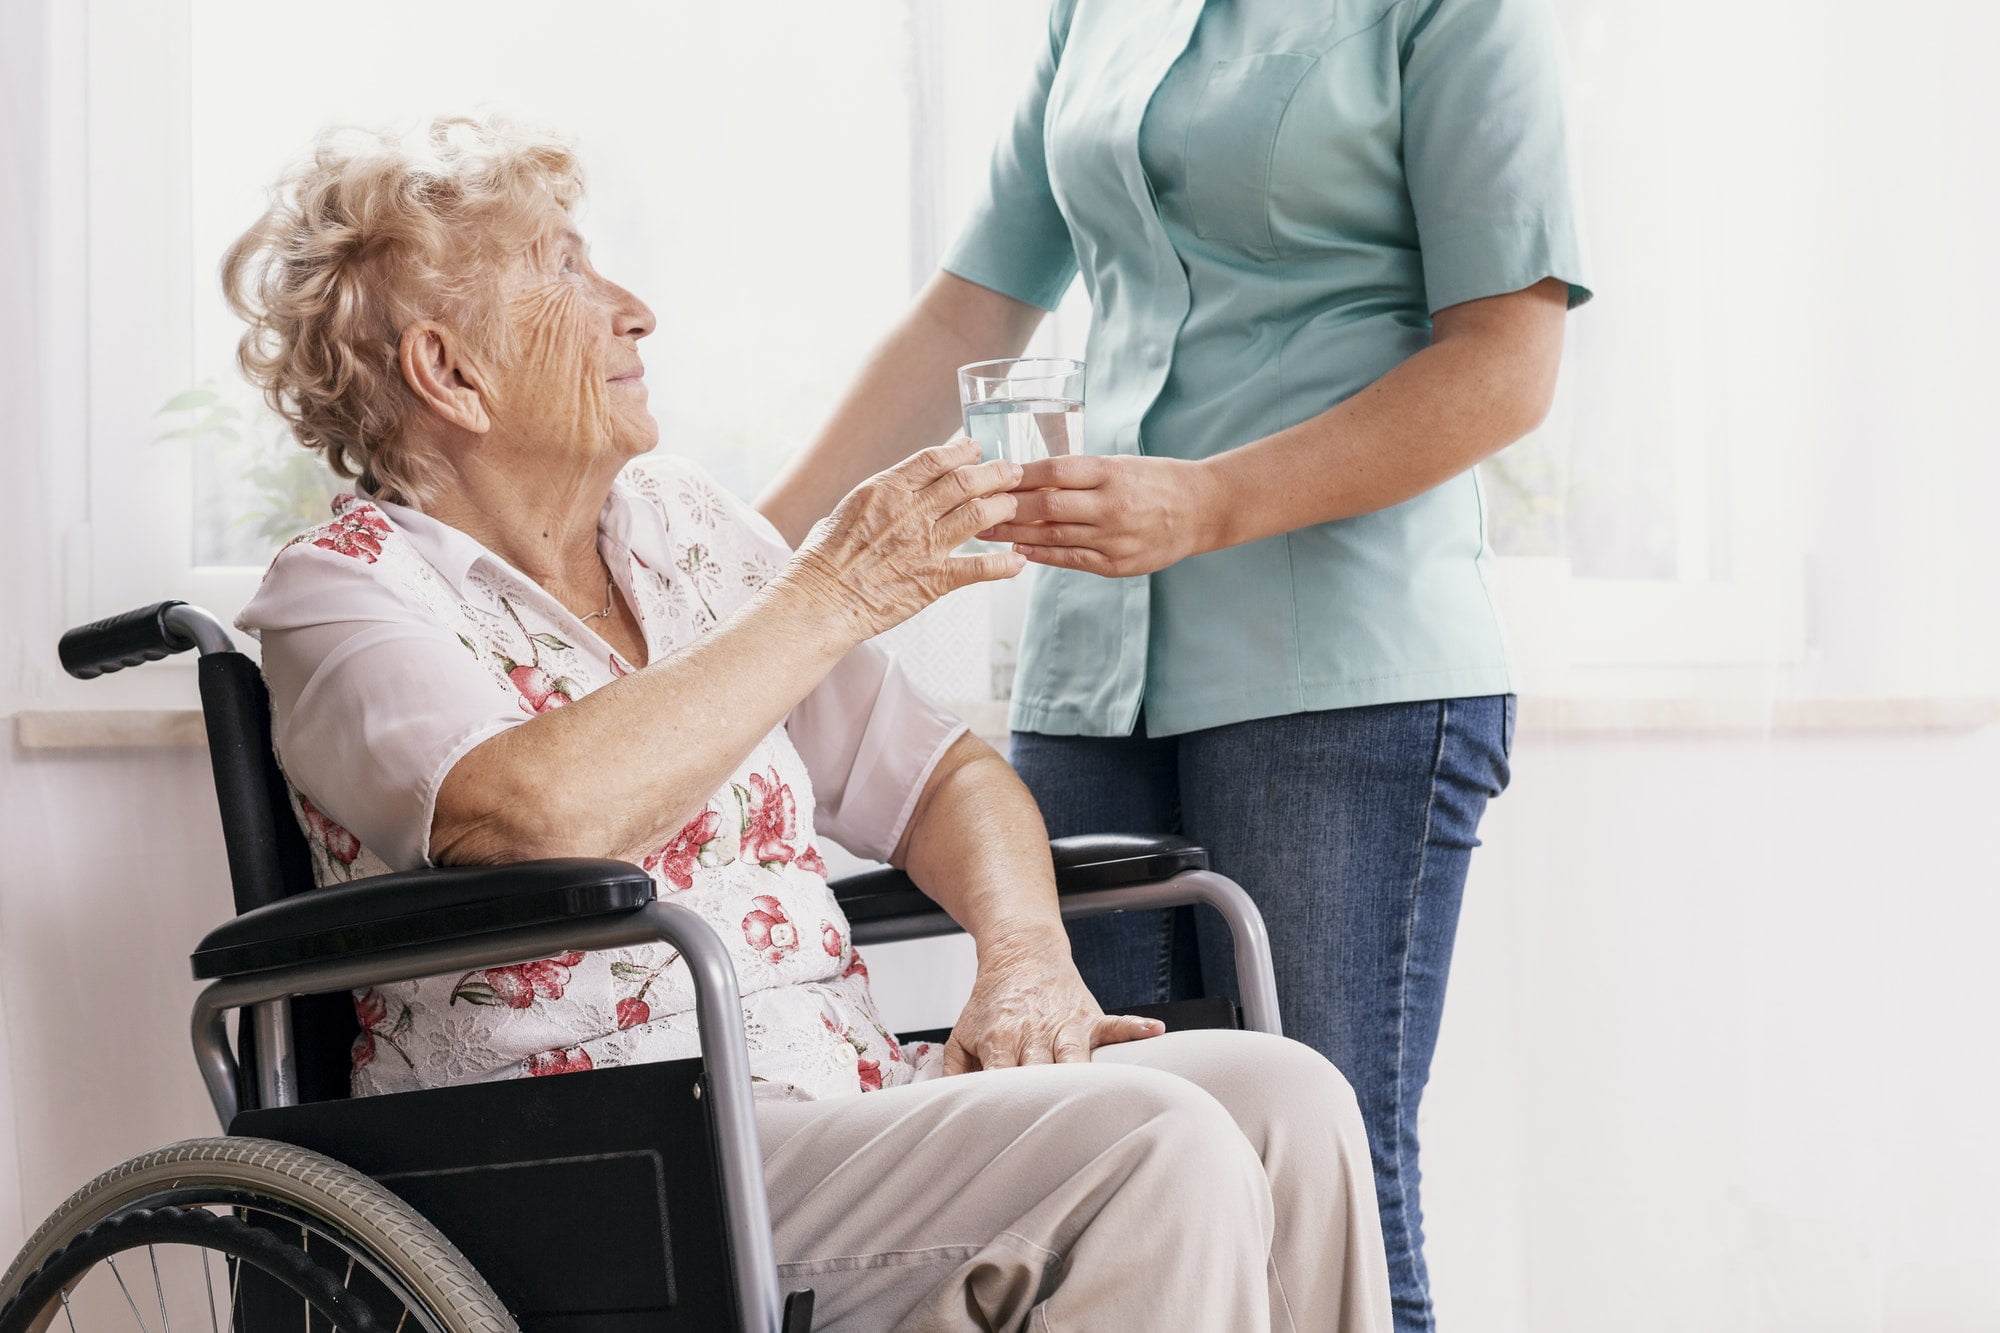 Professional nurse in a blue uniform gives a glass of water to an elderly woman in a wheelchair